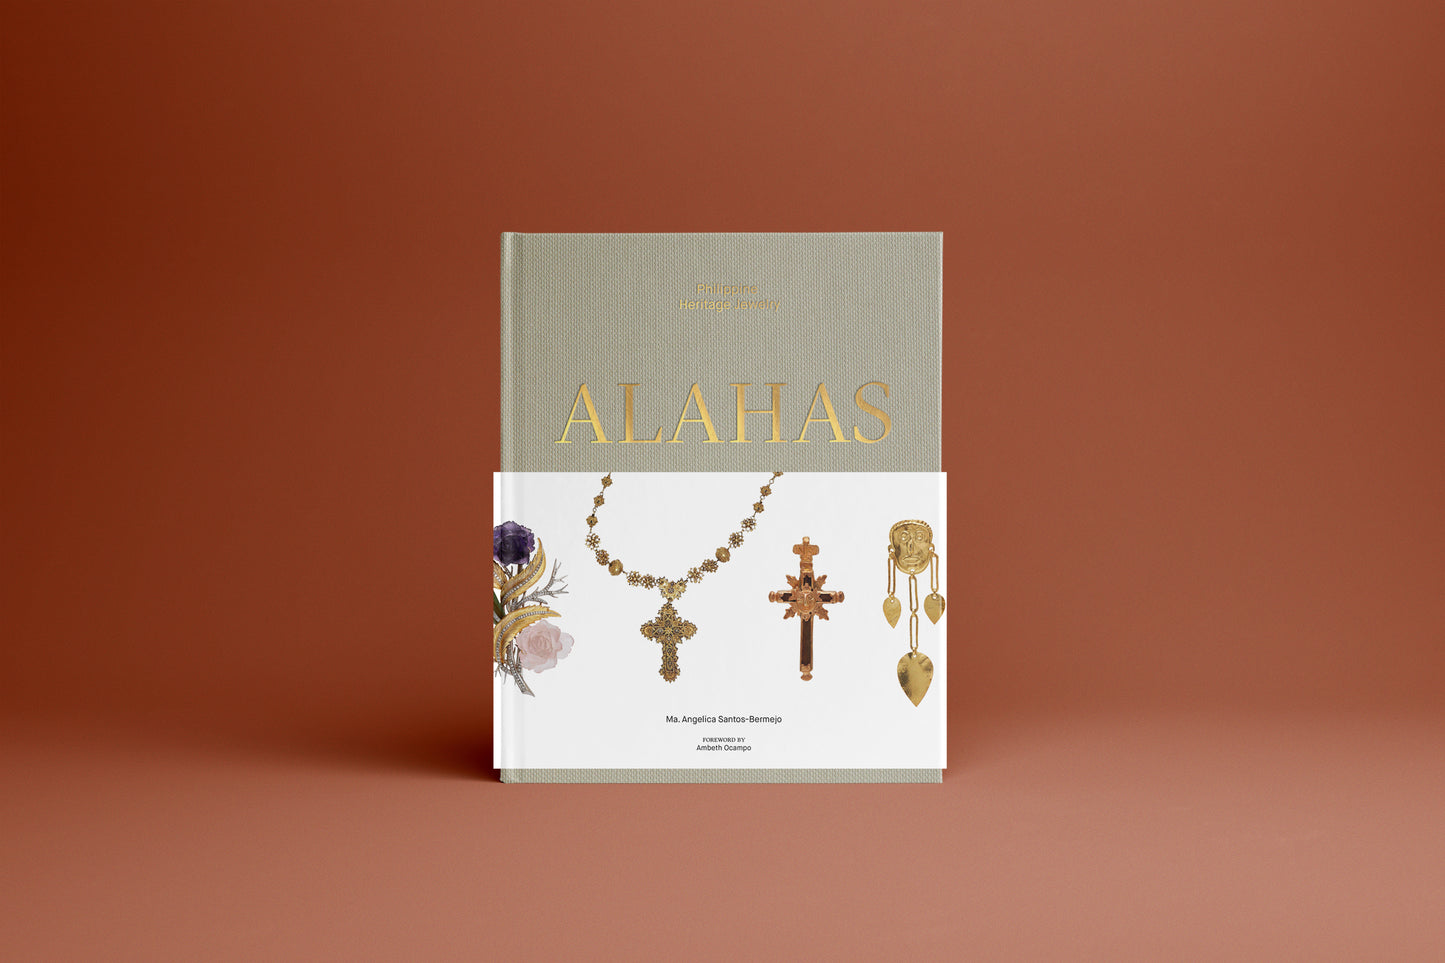 ALAHAS: Philippine Heritage Jewelry (Limited Early Bird Signed Copy with Tote Bag)